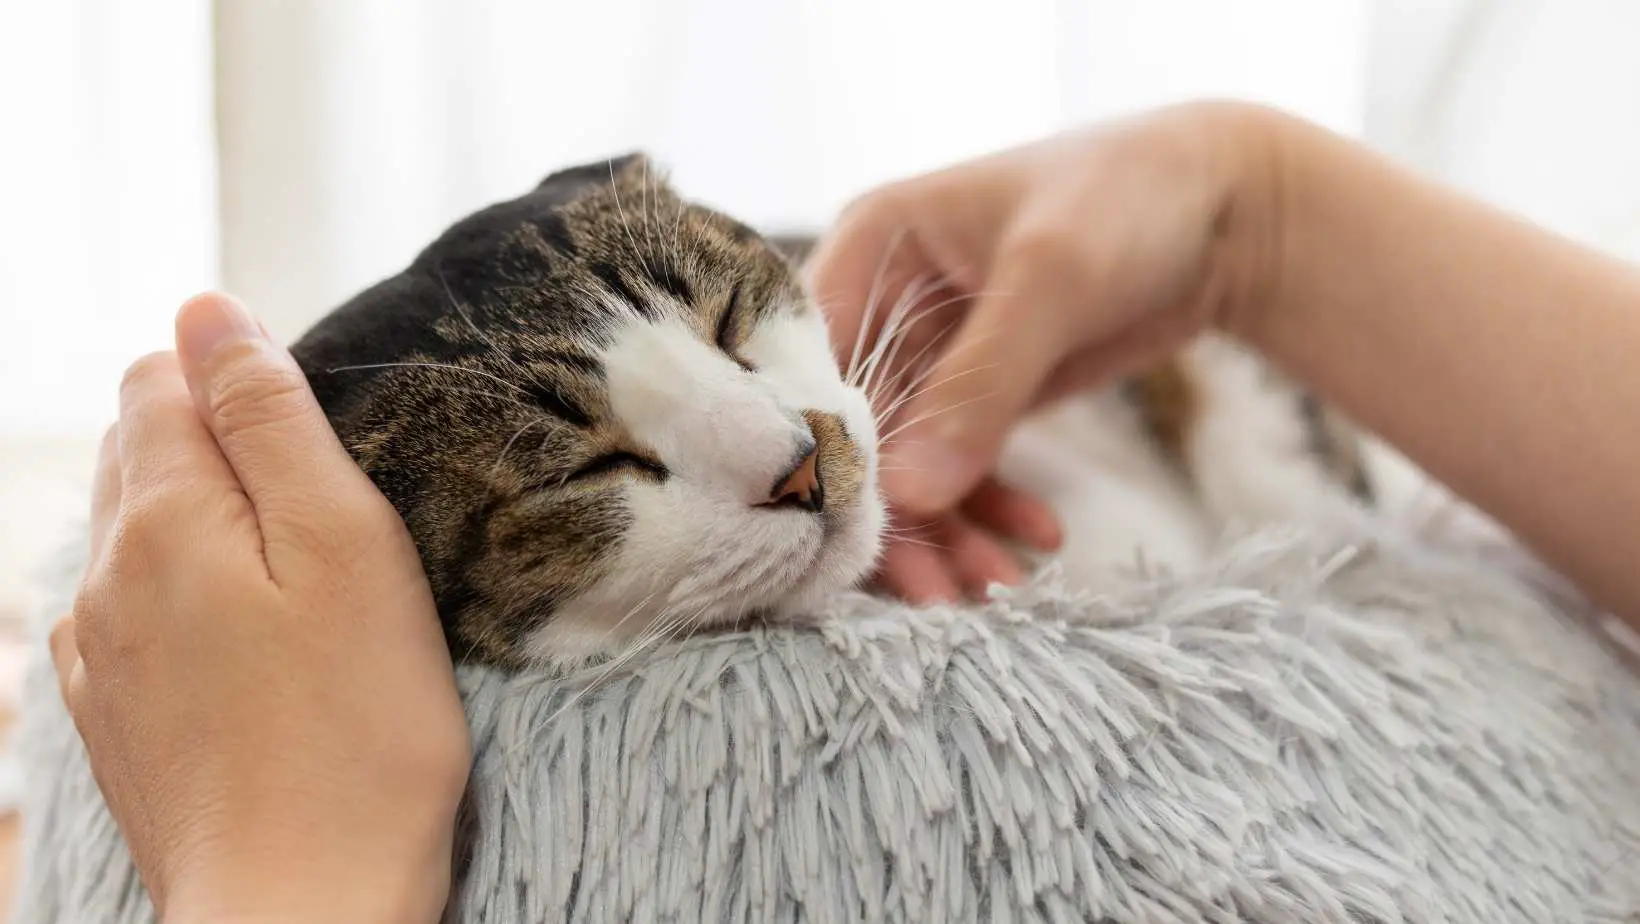 How to Comfort a Cat in Pain?